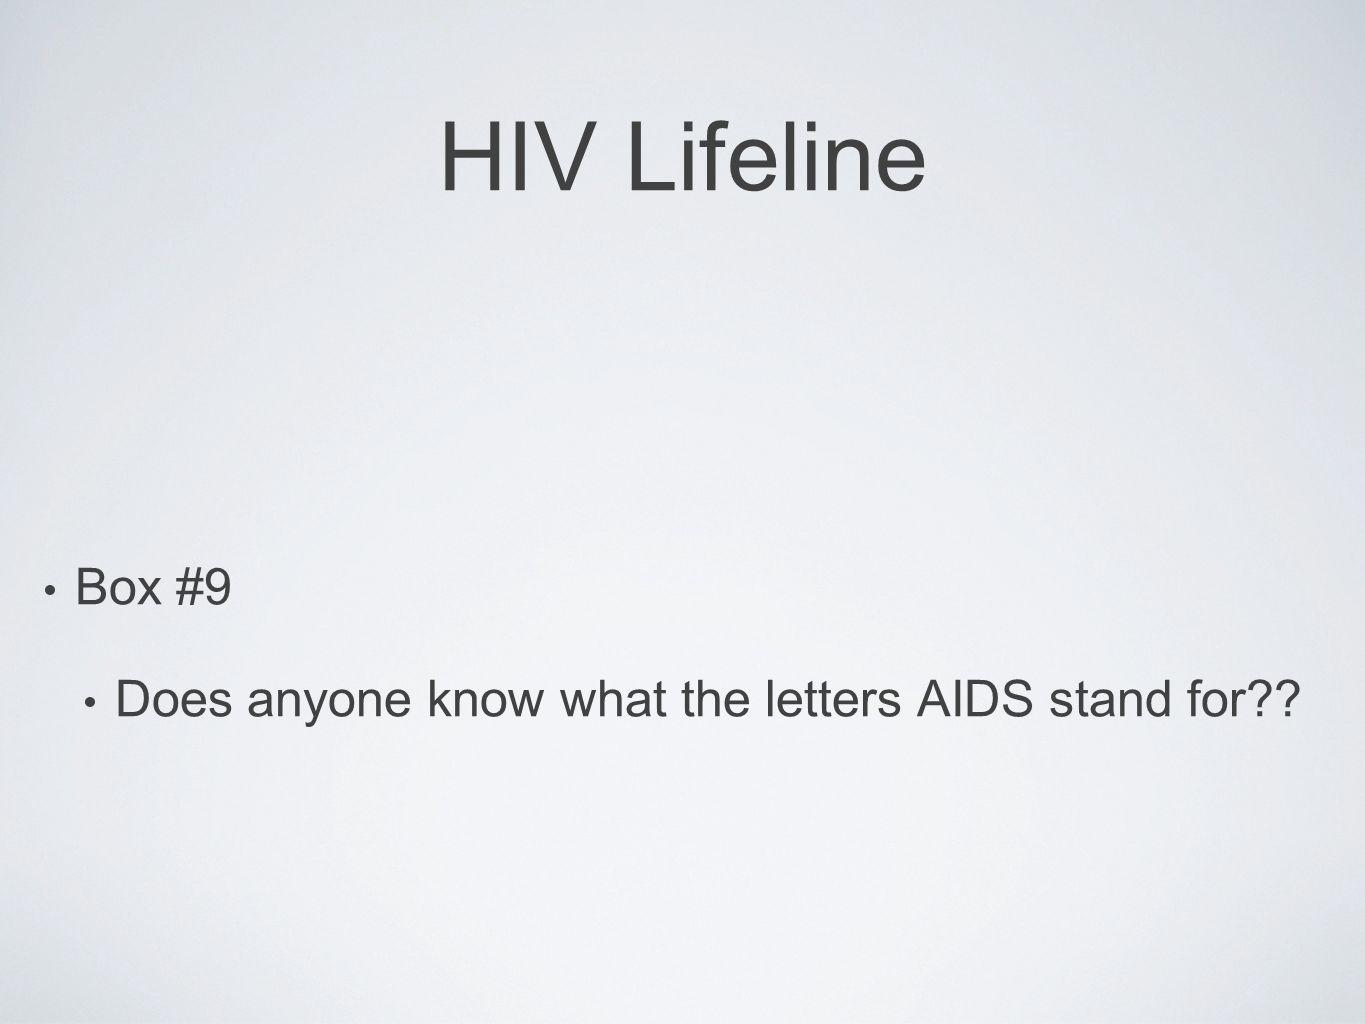 HIV Lifeline Box #9 Does anyone know what the letters AIDS stand for